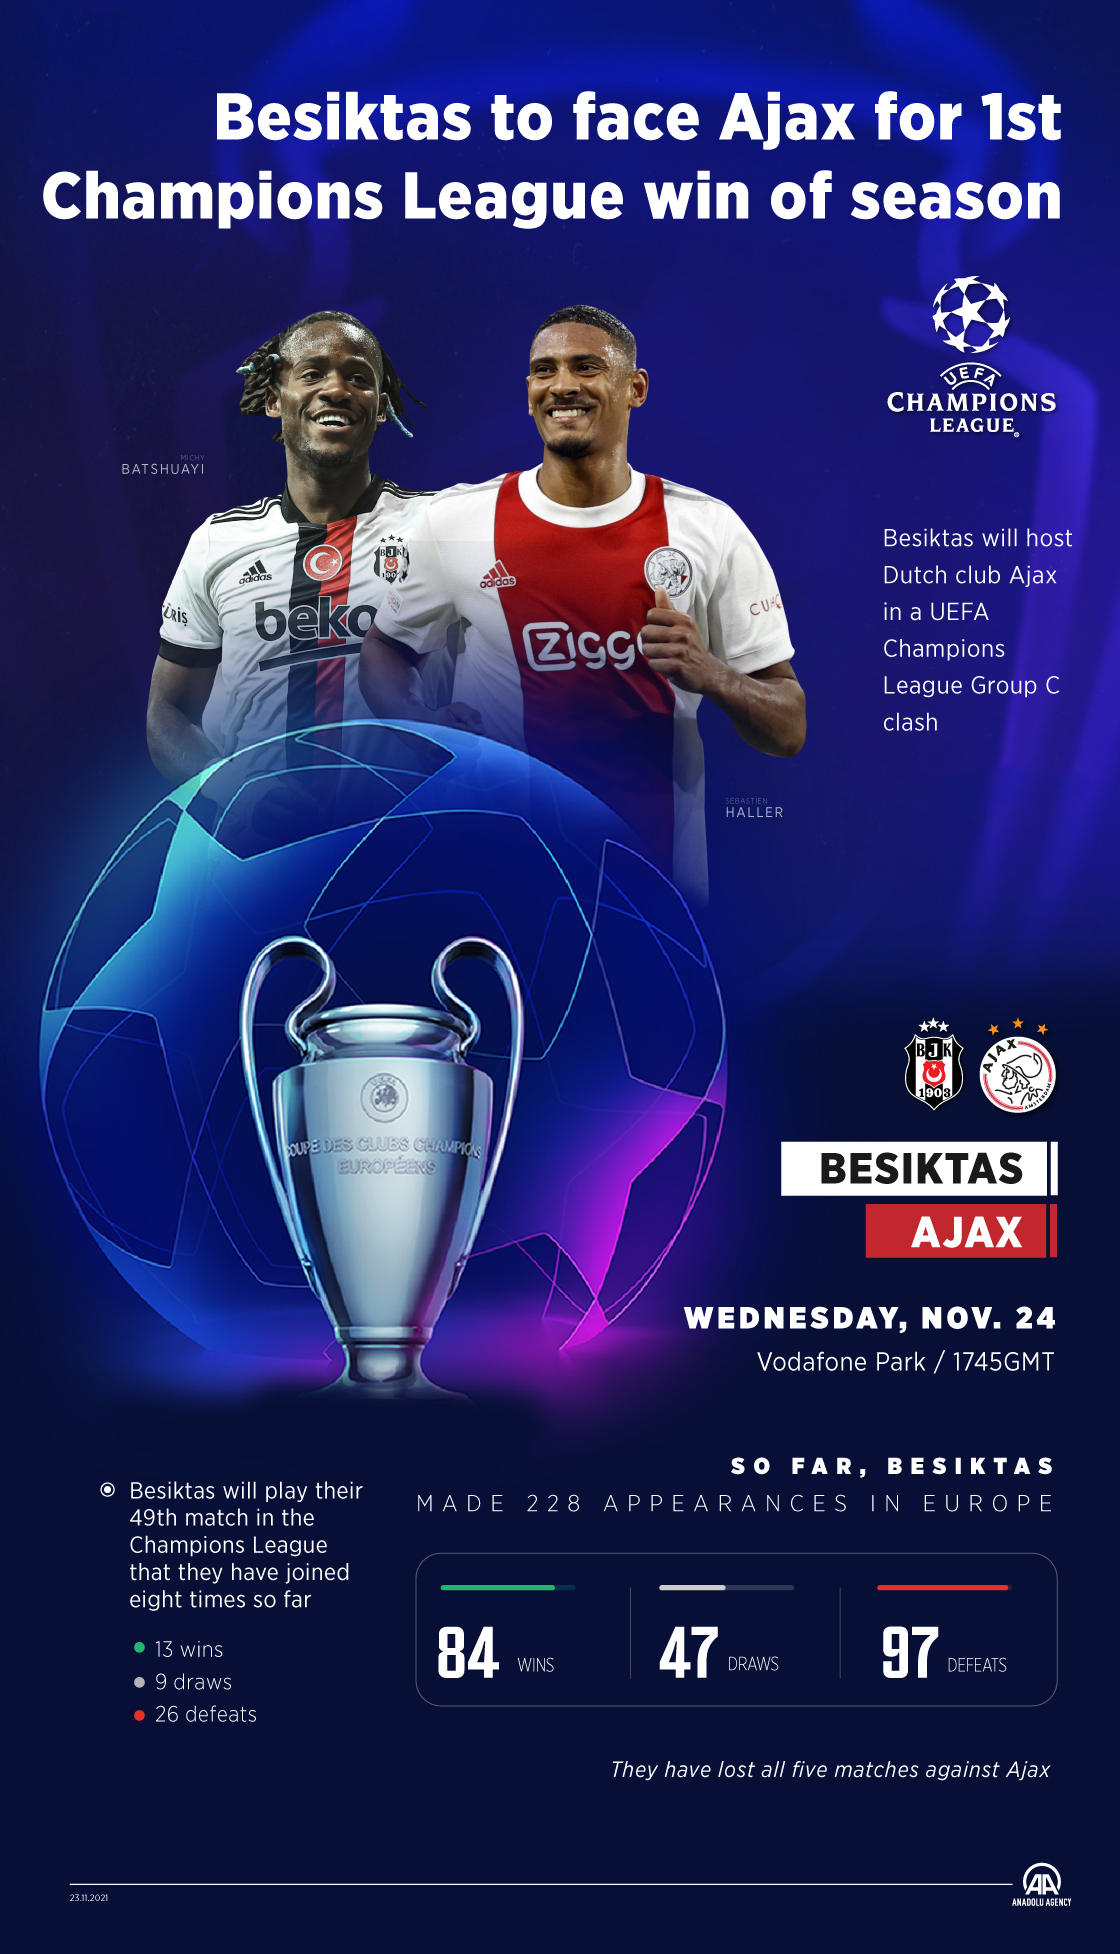  Besiktas to face Ajax for 1st Champions League win of season